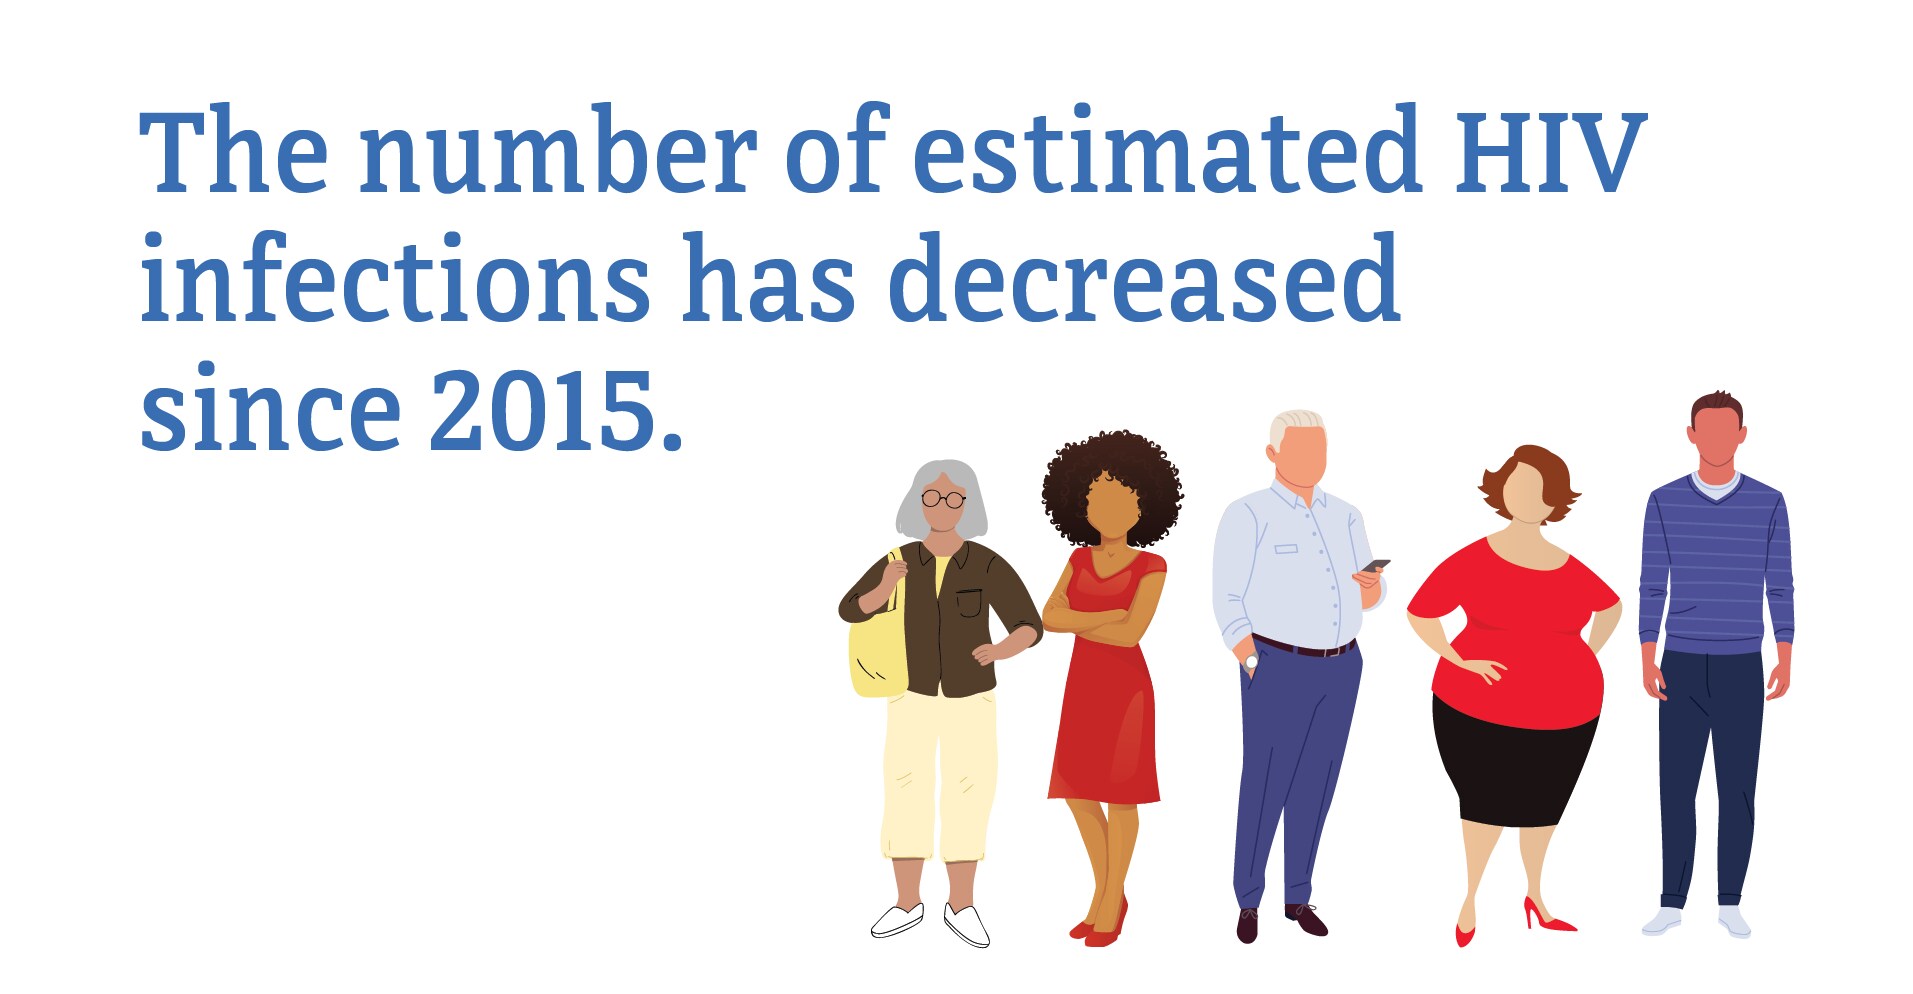 The number of estimated HIV infections decreased among Hispanic/Latino people.